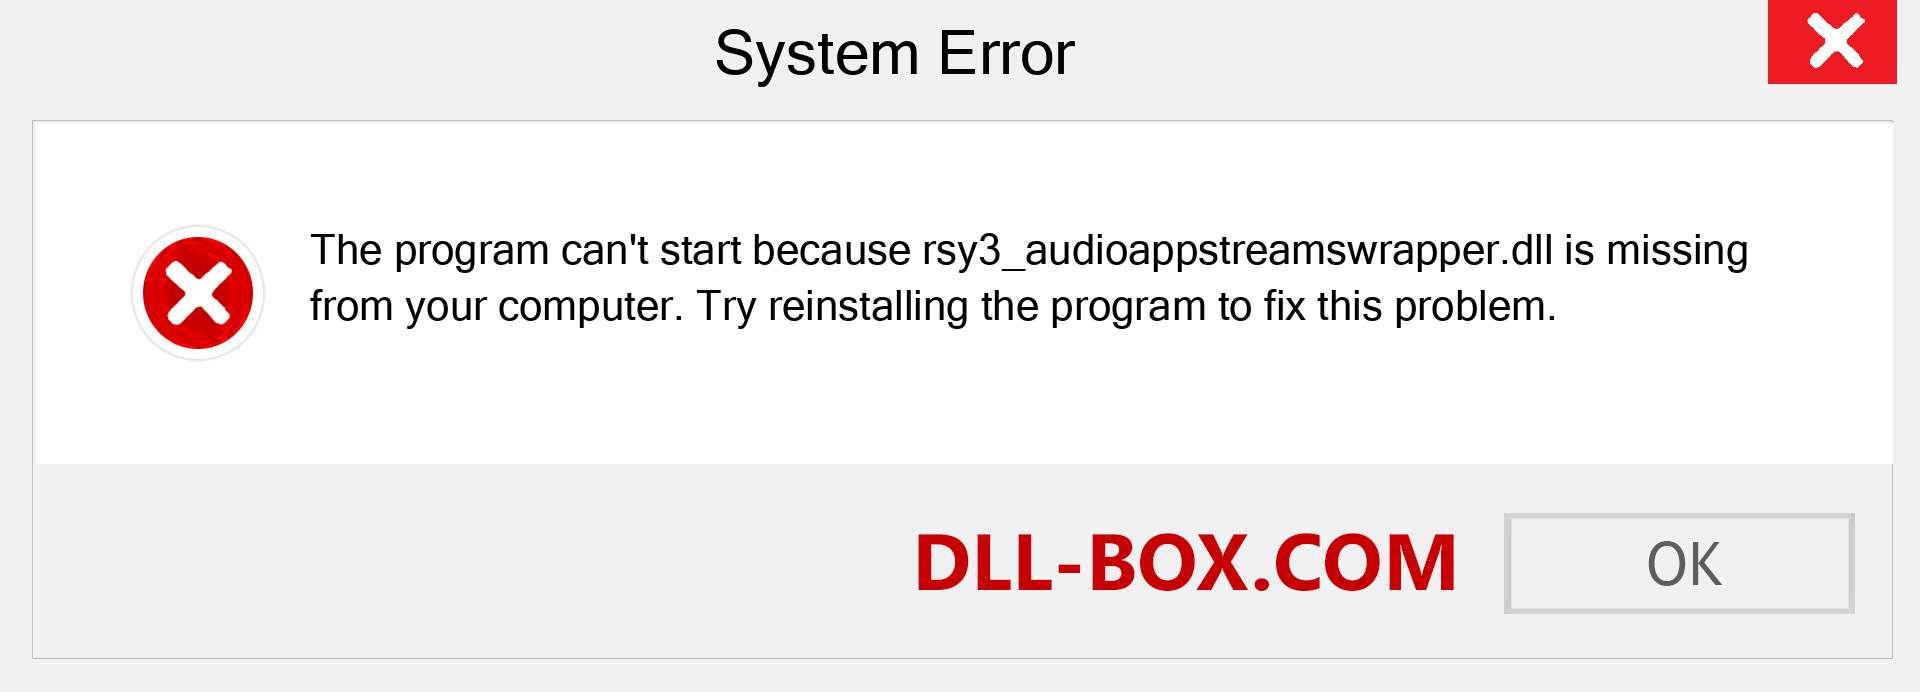  rsy3_audioappstreamswrapper.dll file is missing?. Download for Windows 7, 8, 10 - Fix  rsy3_audioappstreamswrapper dll Missing Error on Windows, photos, images